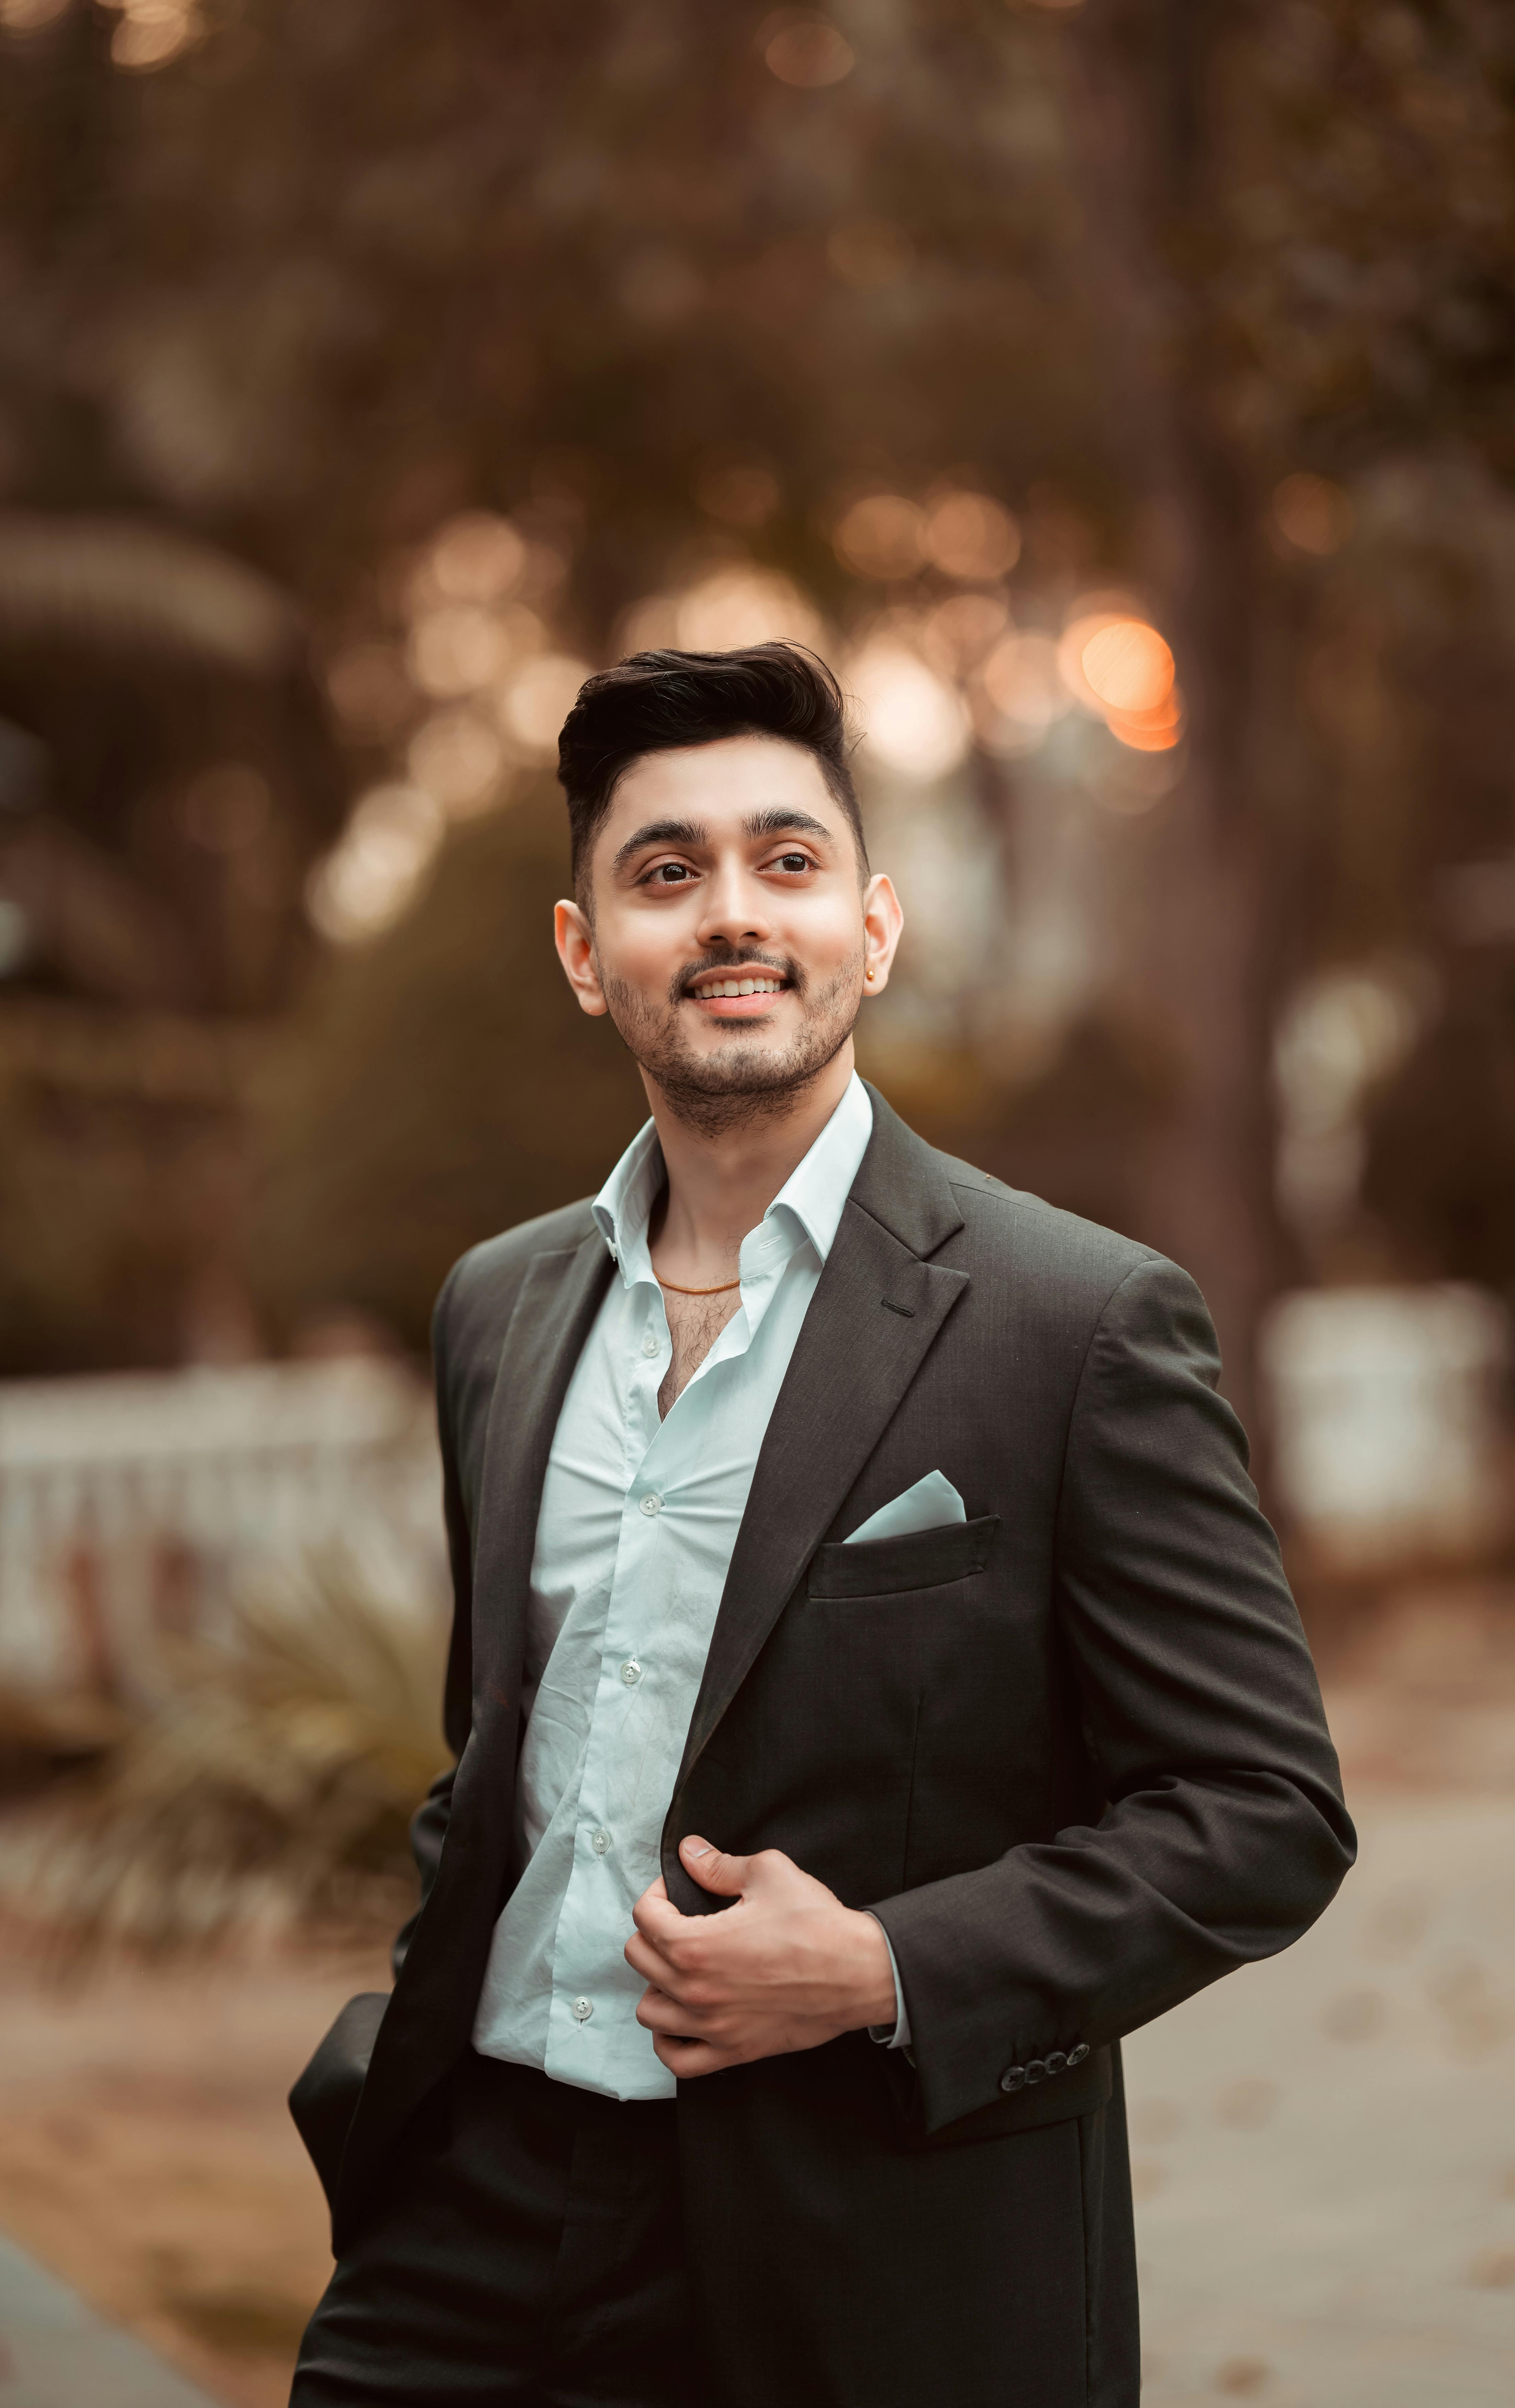 Elegant Young Handsome Man Posing In Fashionable Suit And Eyeglasses.  Studio Shot. Stock Photo, Picture and Royalty Free Image. Image 64307940.